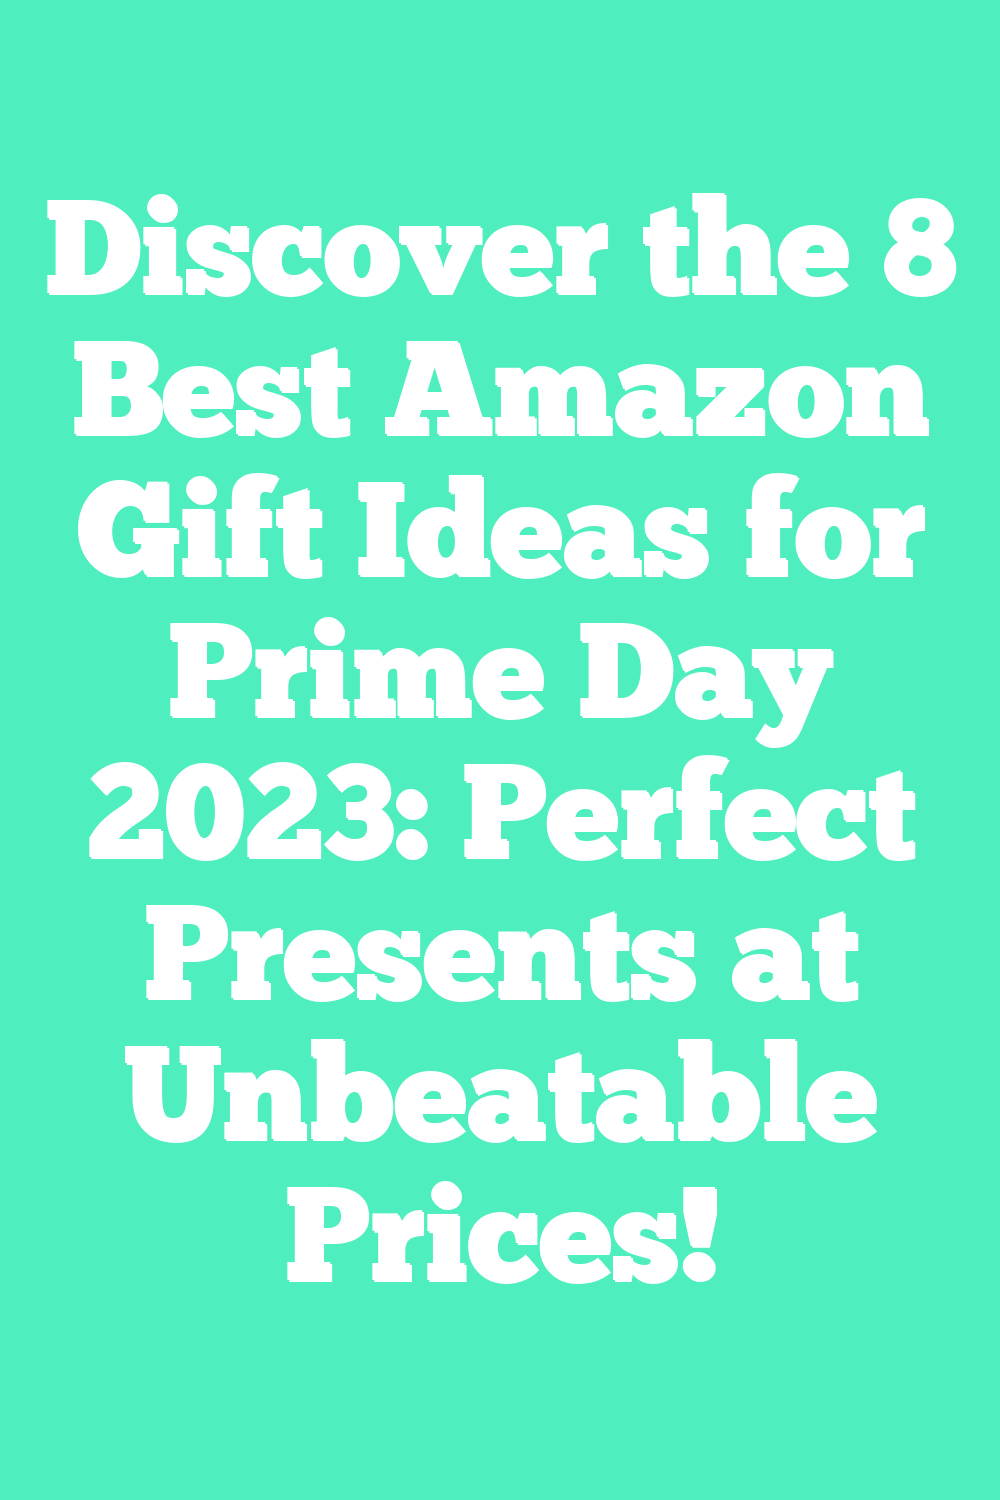 Discover the 8 Best Amazon Gift Ideas for Prime Day 2023: Perfect Presents at Unbeatable Prices!